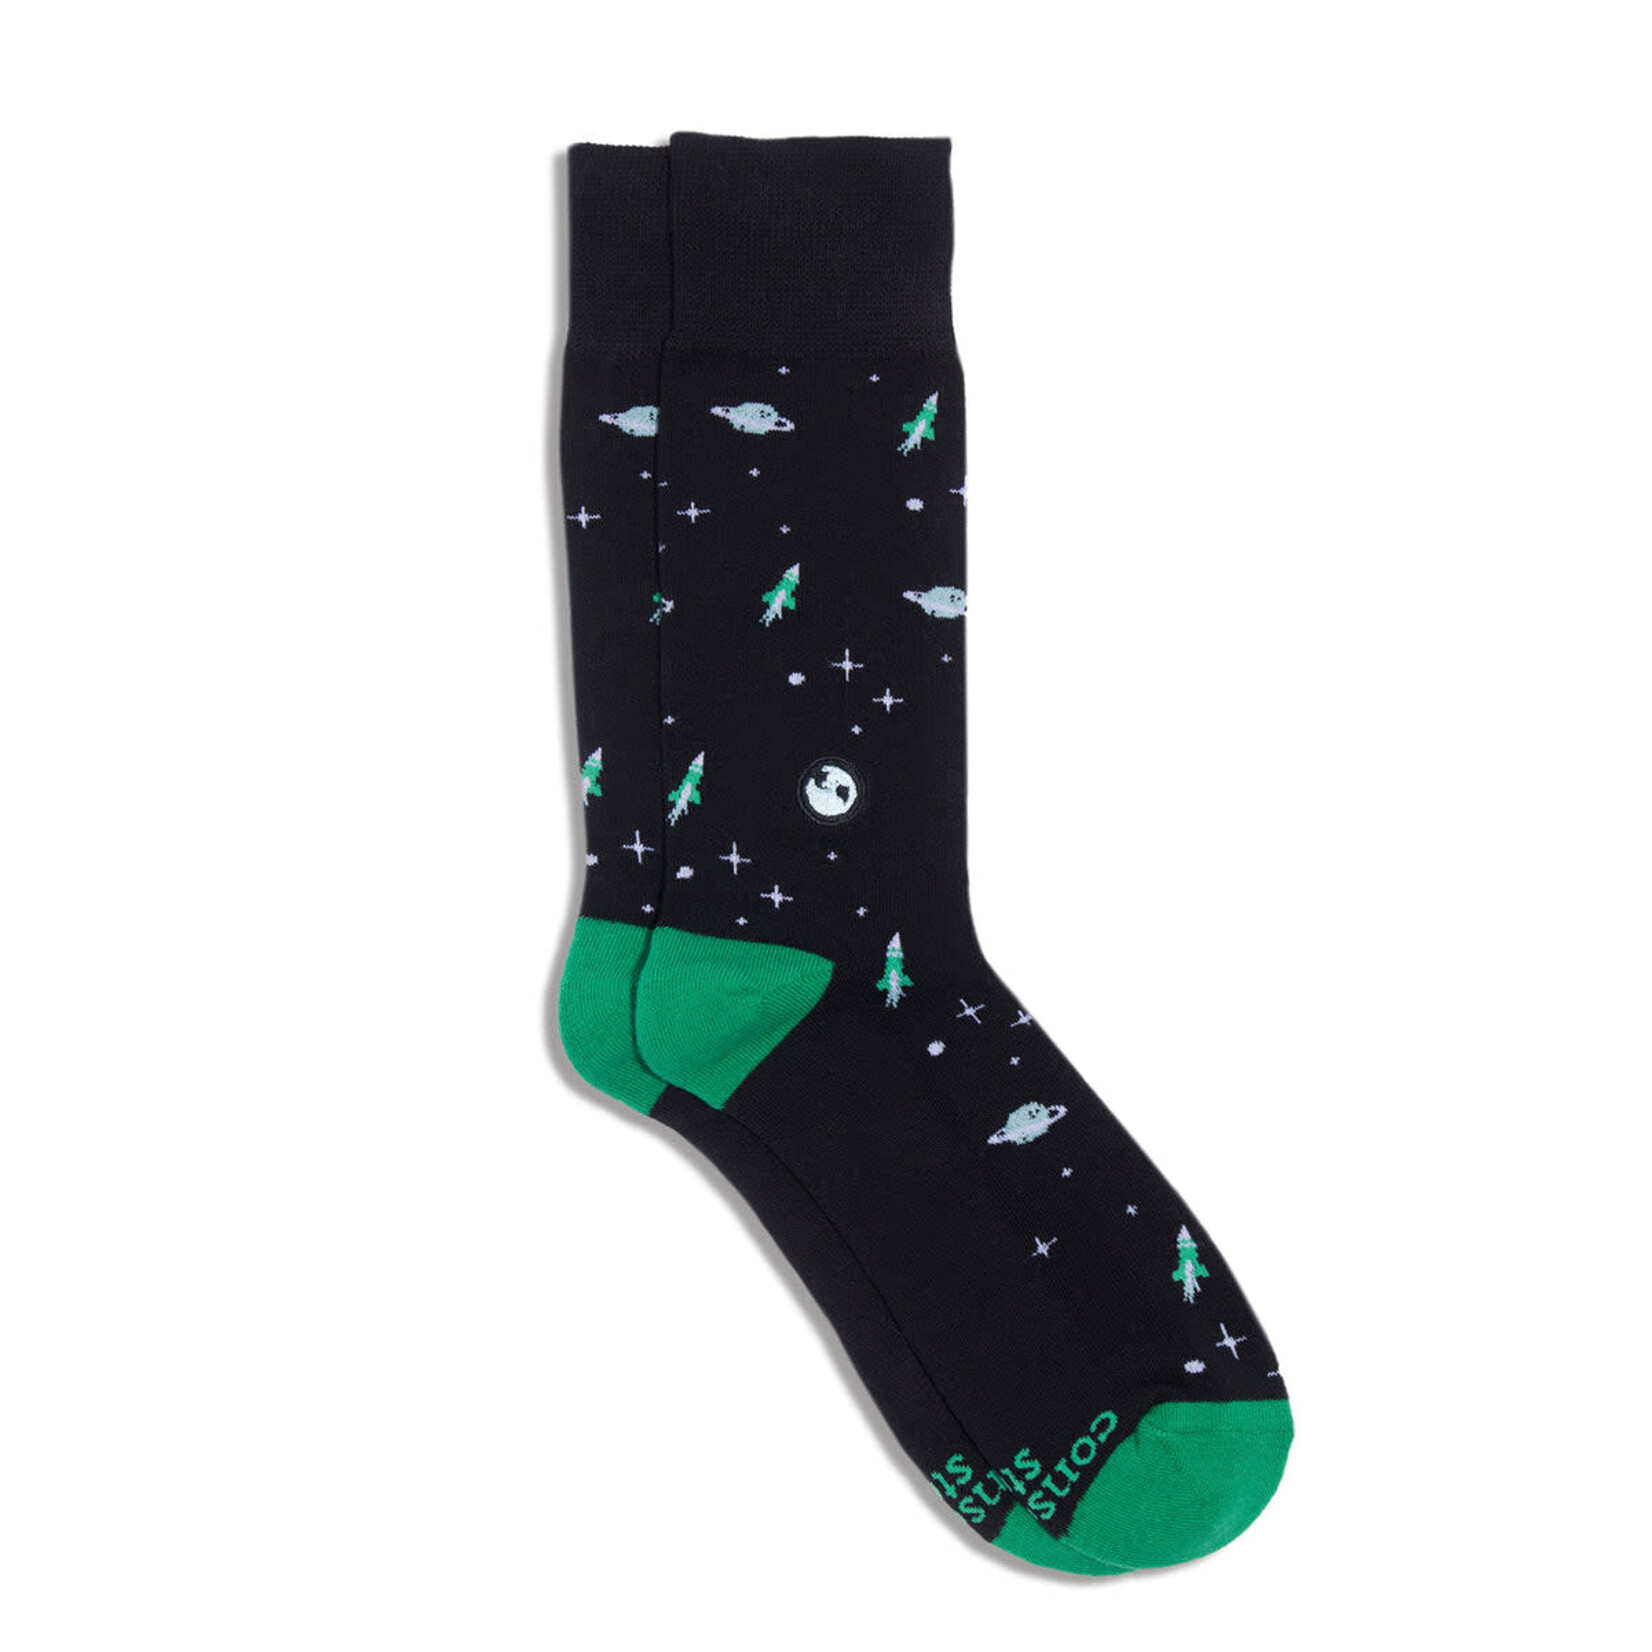 Conscious Step Conscious Step Socks that Protect Our Planet, Small